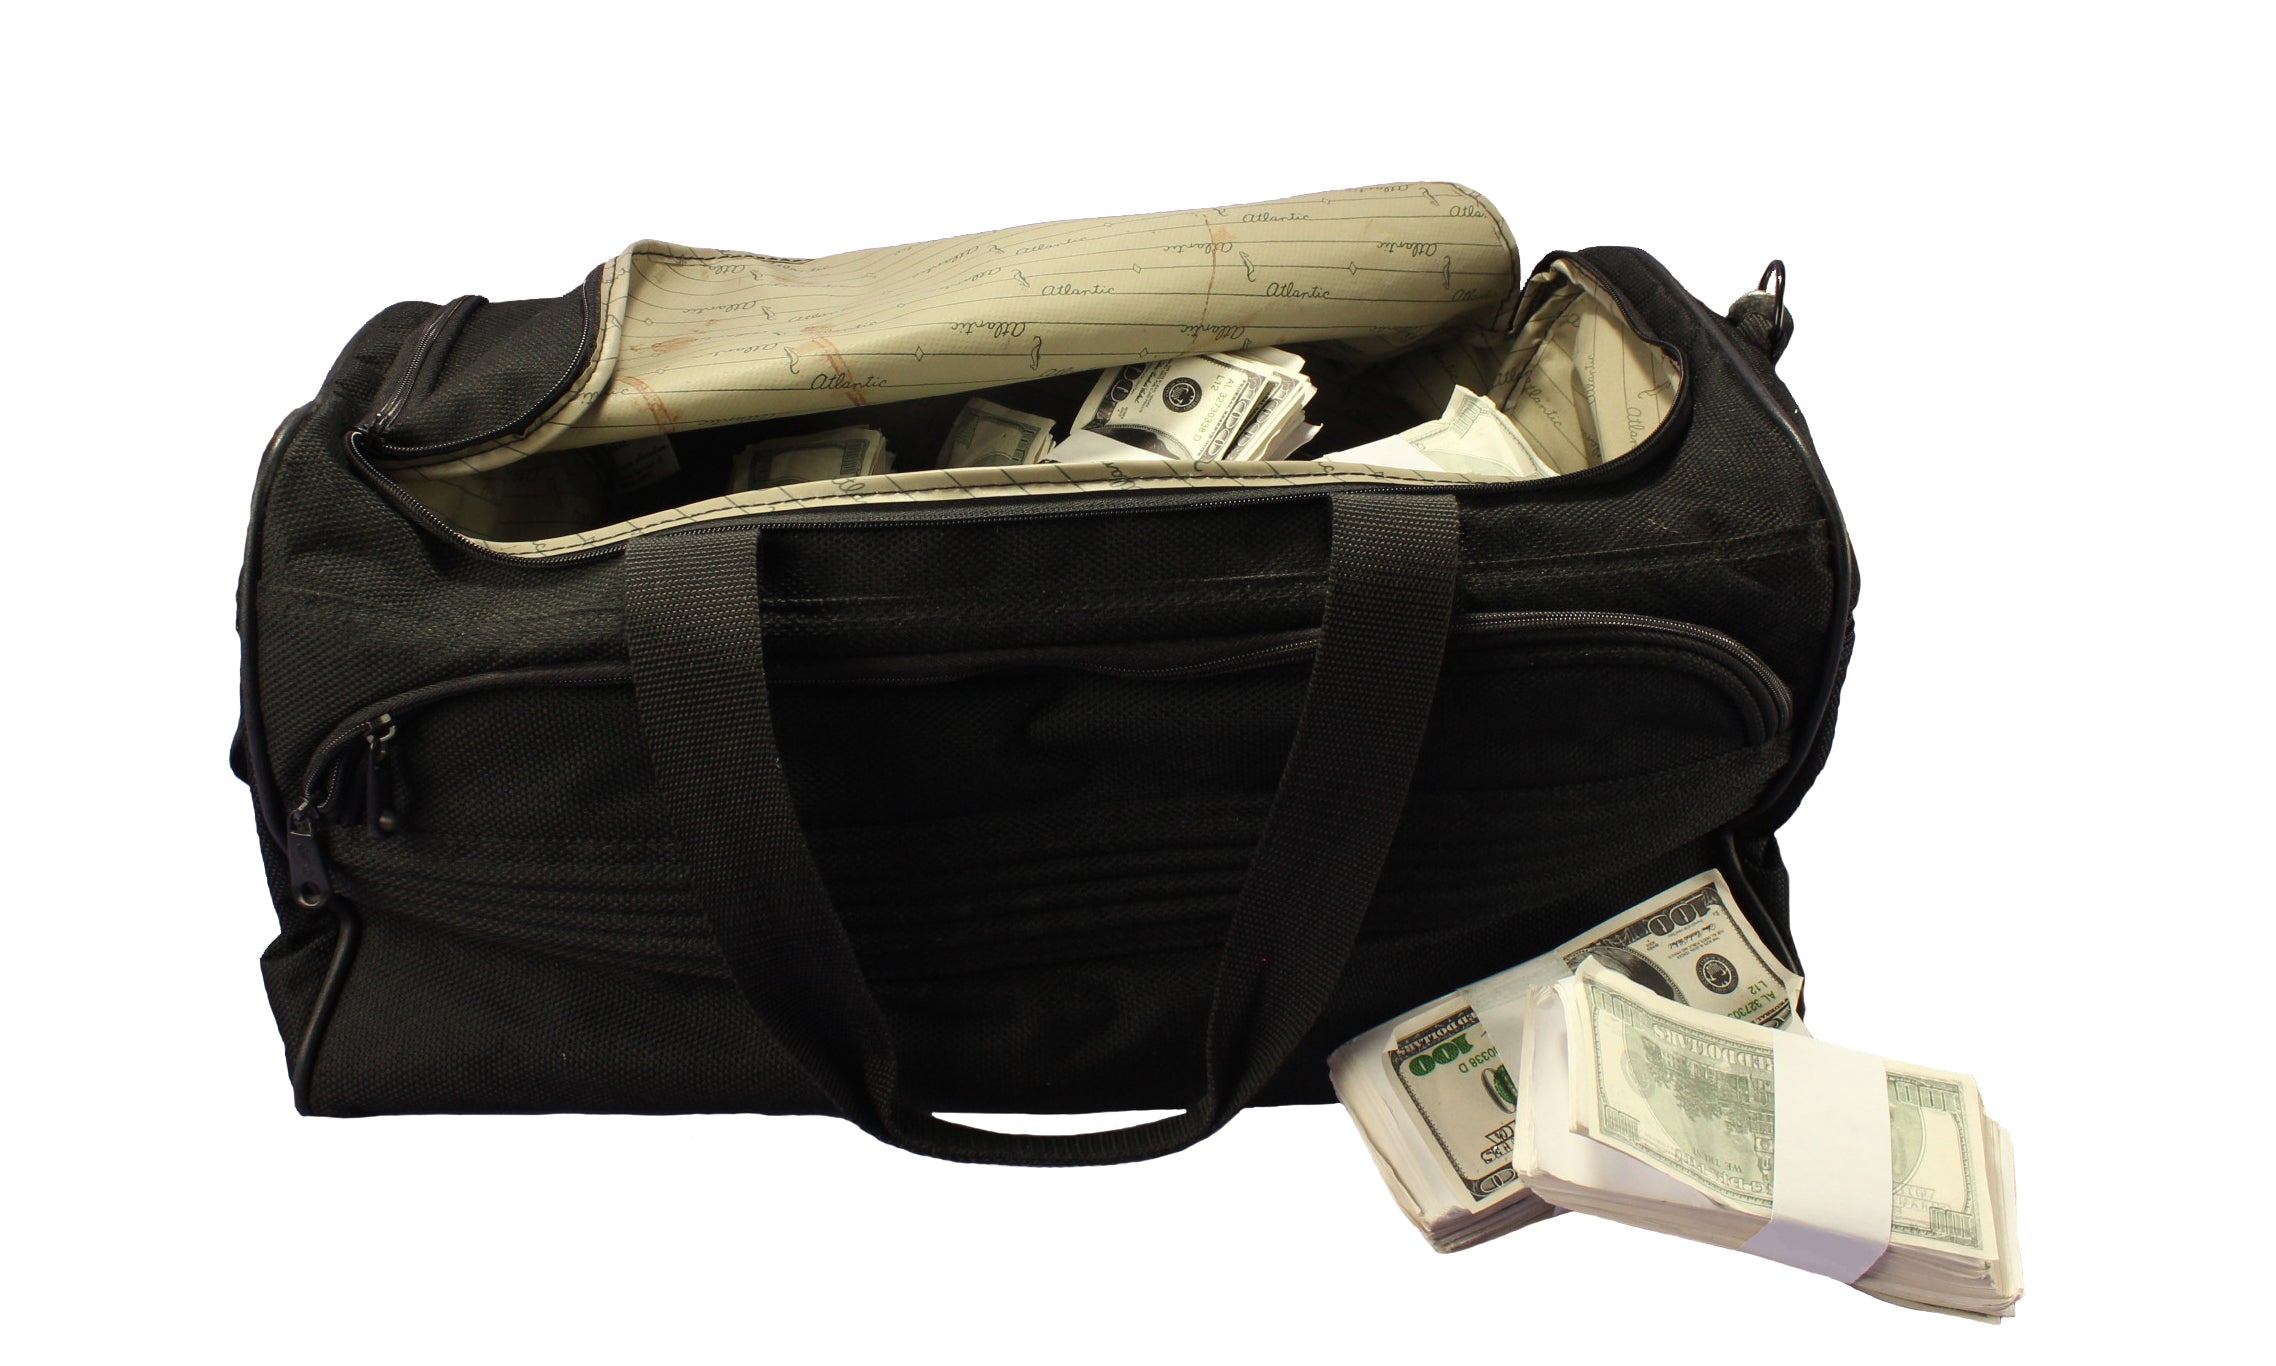 Money Duffle Bag for Sale by designs89